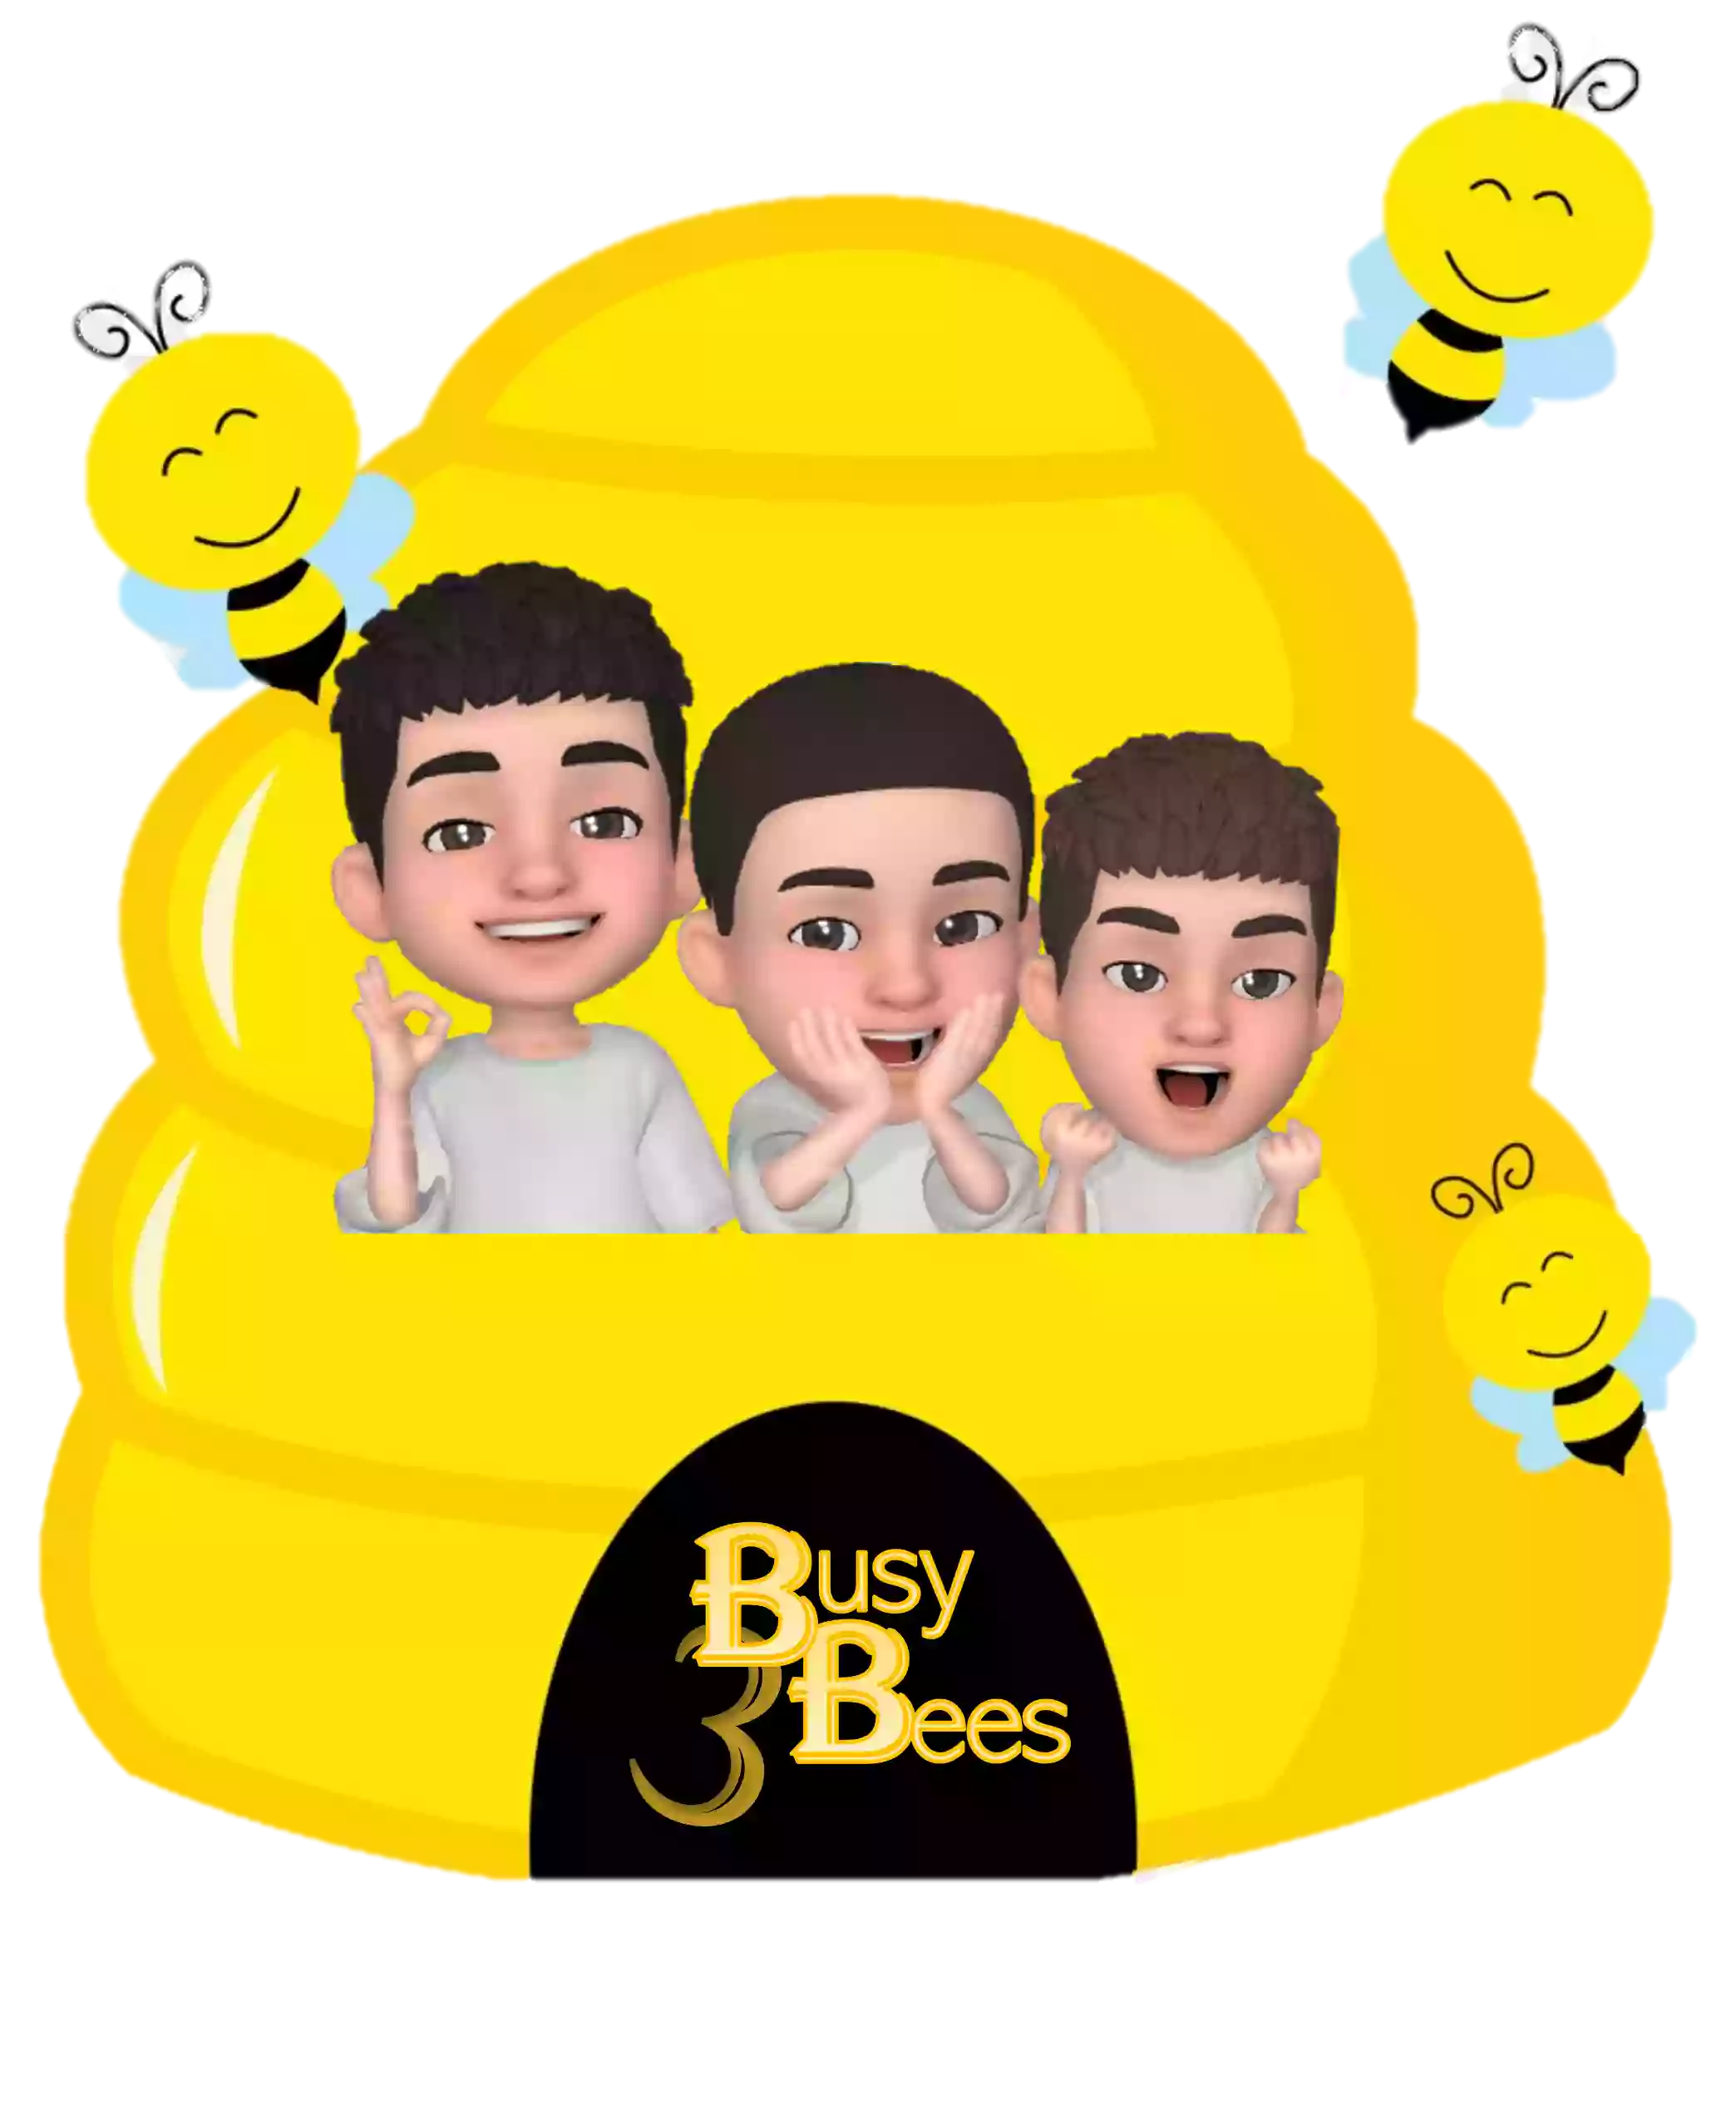 3 Busy Bees